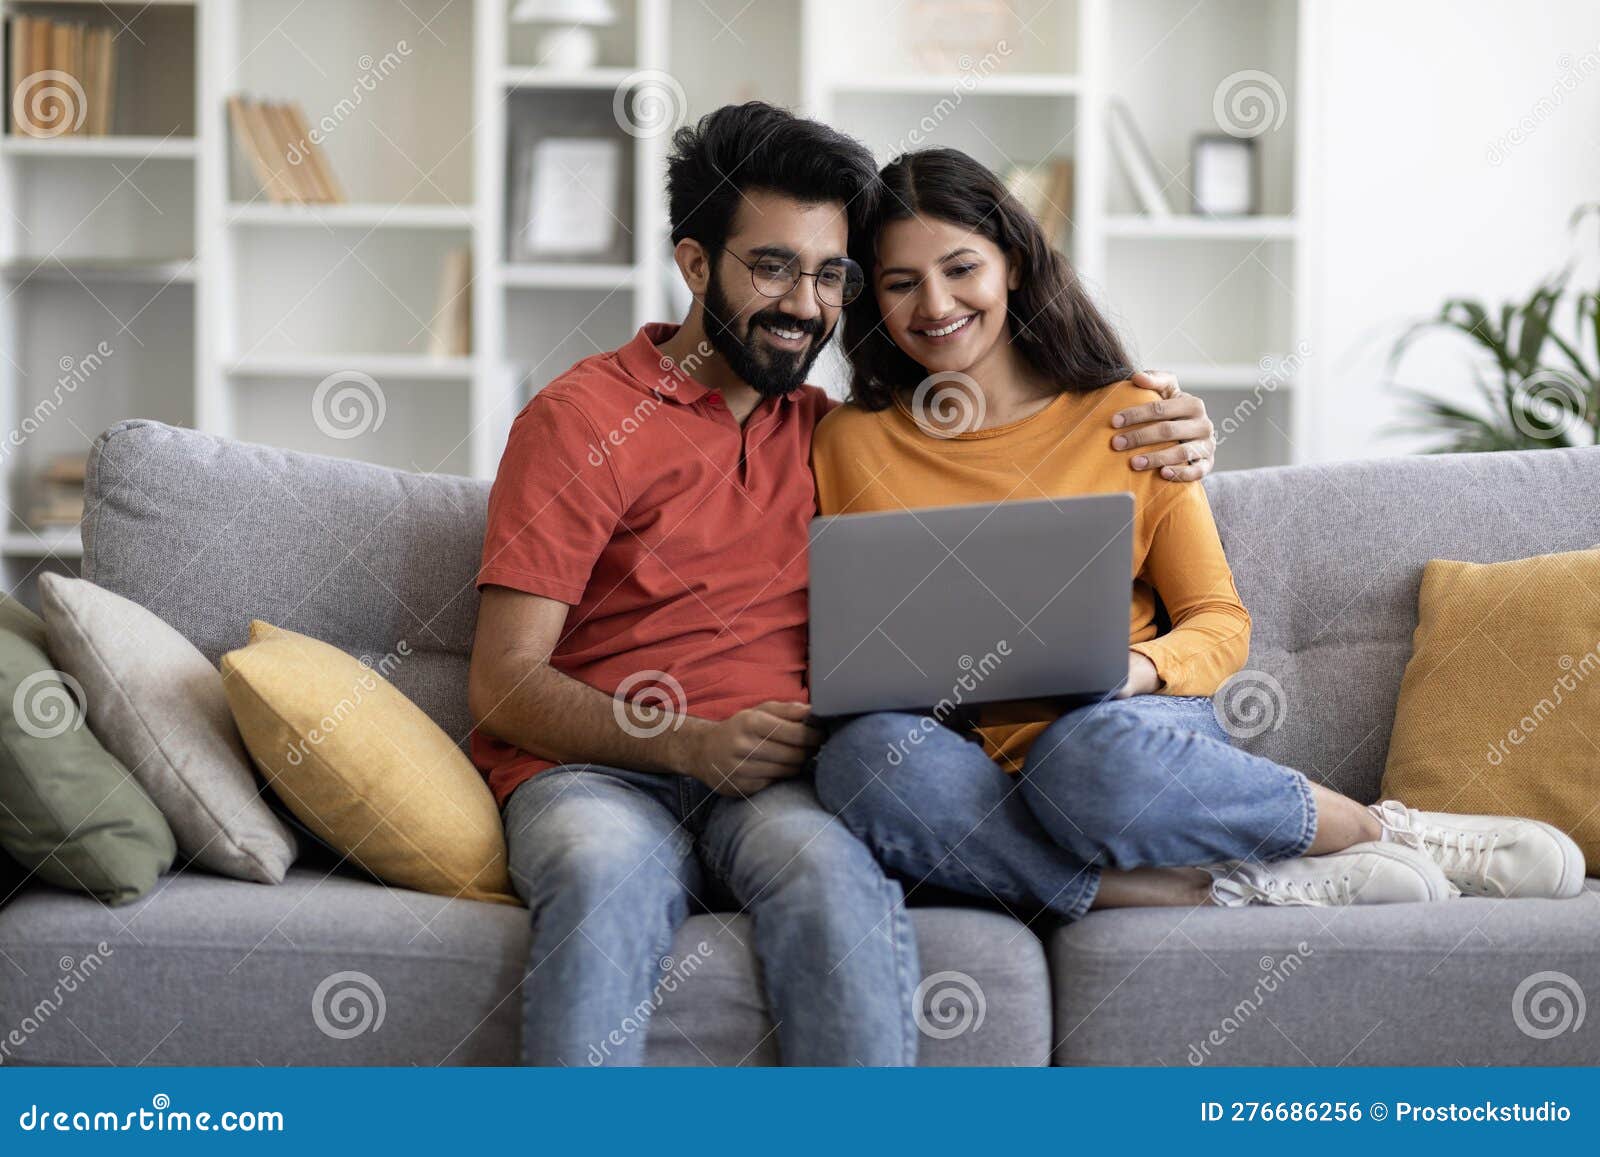 weekend passtime. happy indian couple using laptop computer at home together